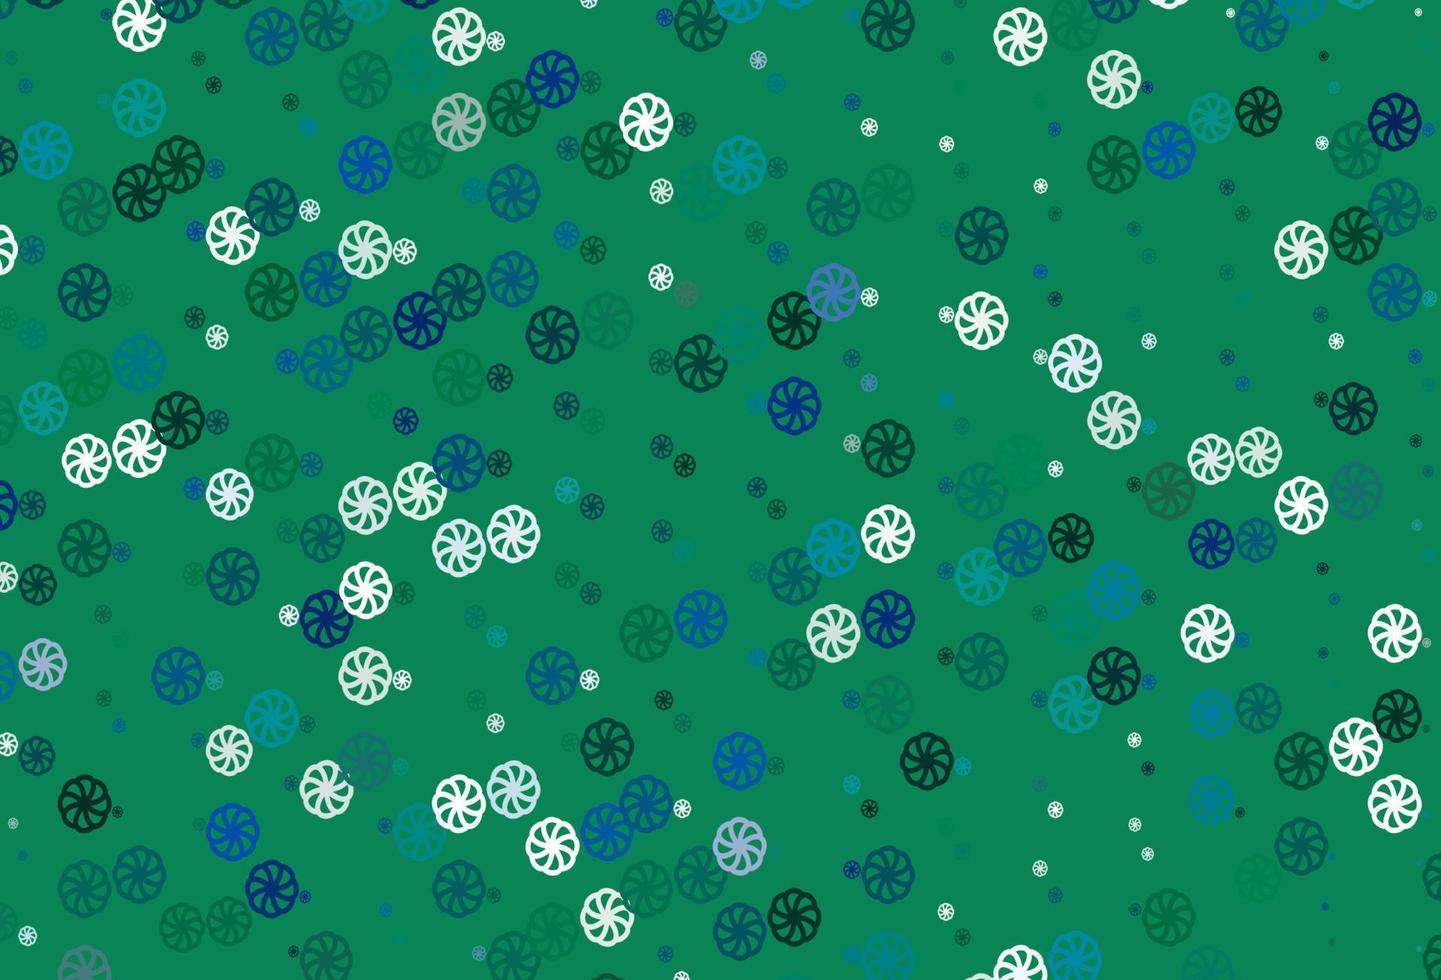 Light Blue, Green vector layout with bright snowflakes.